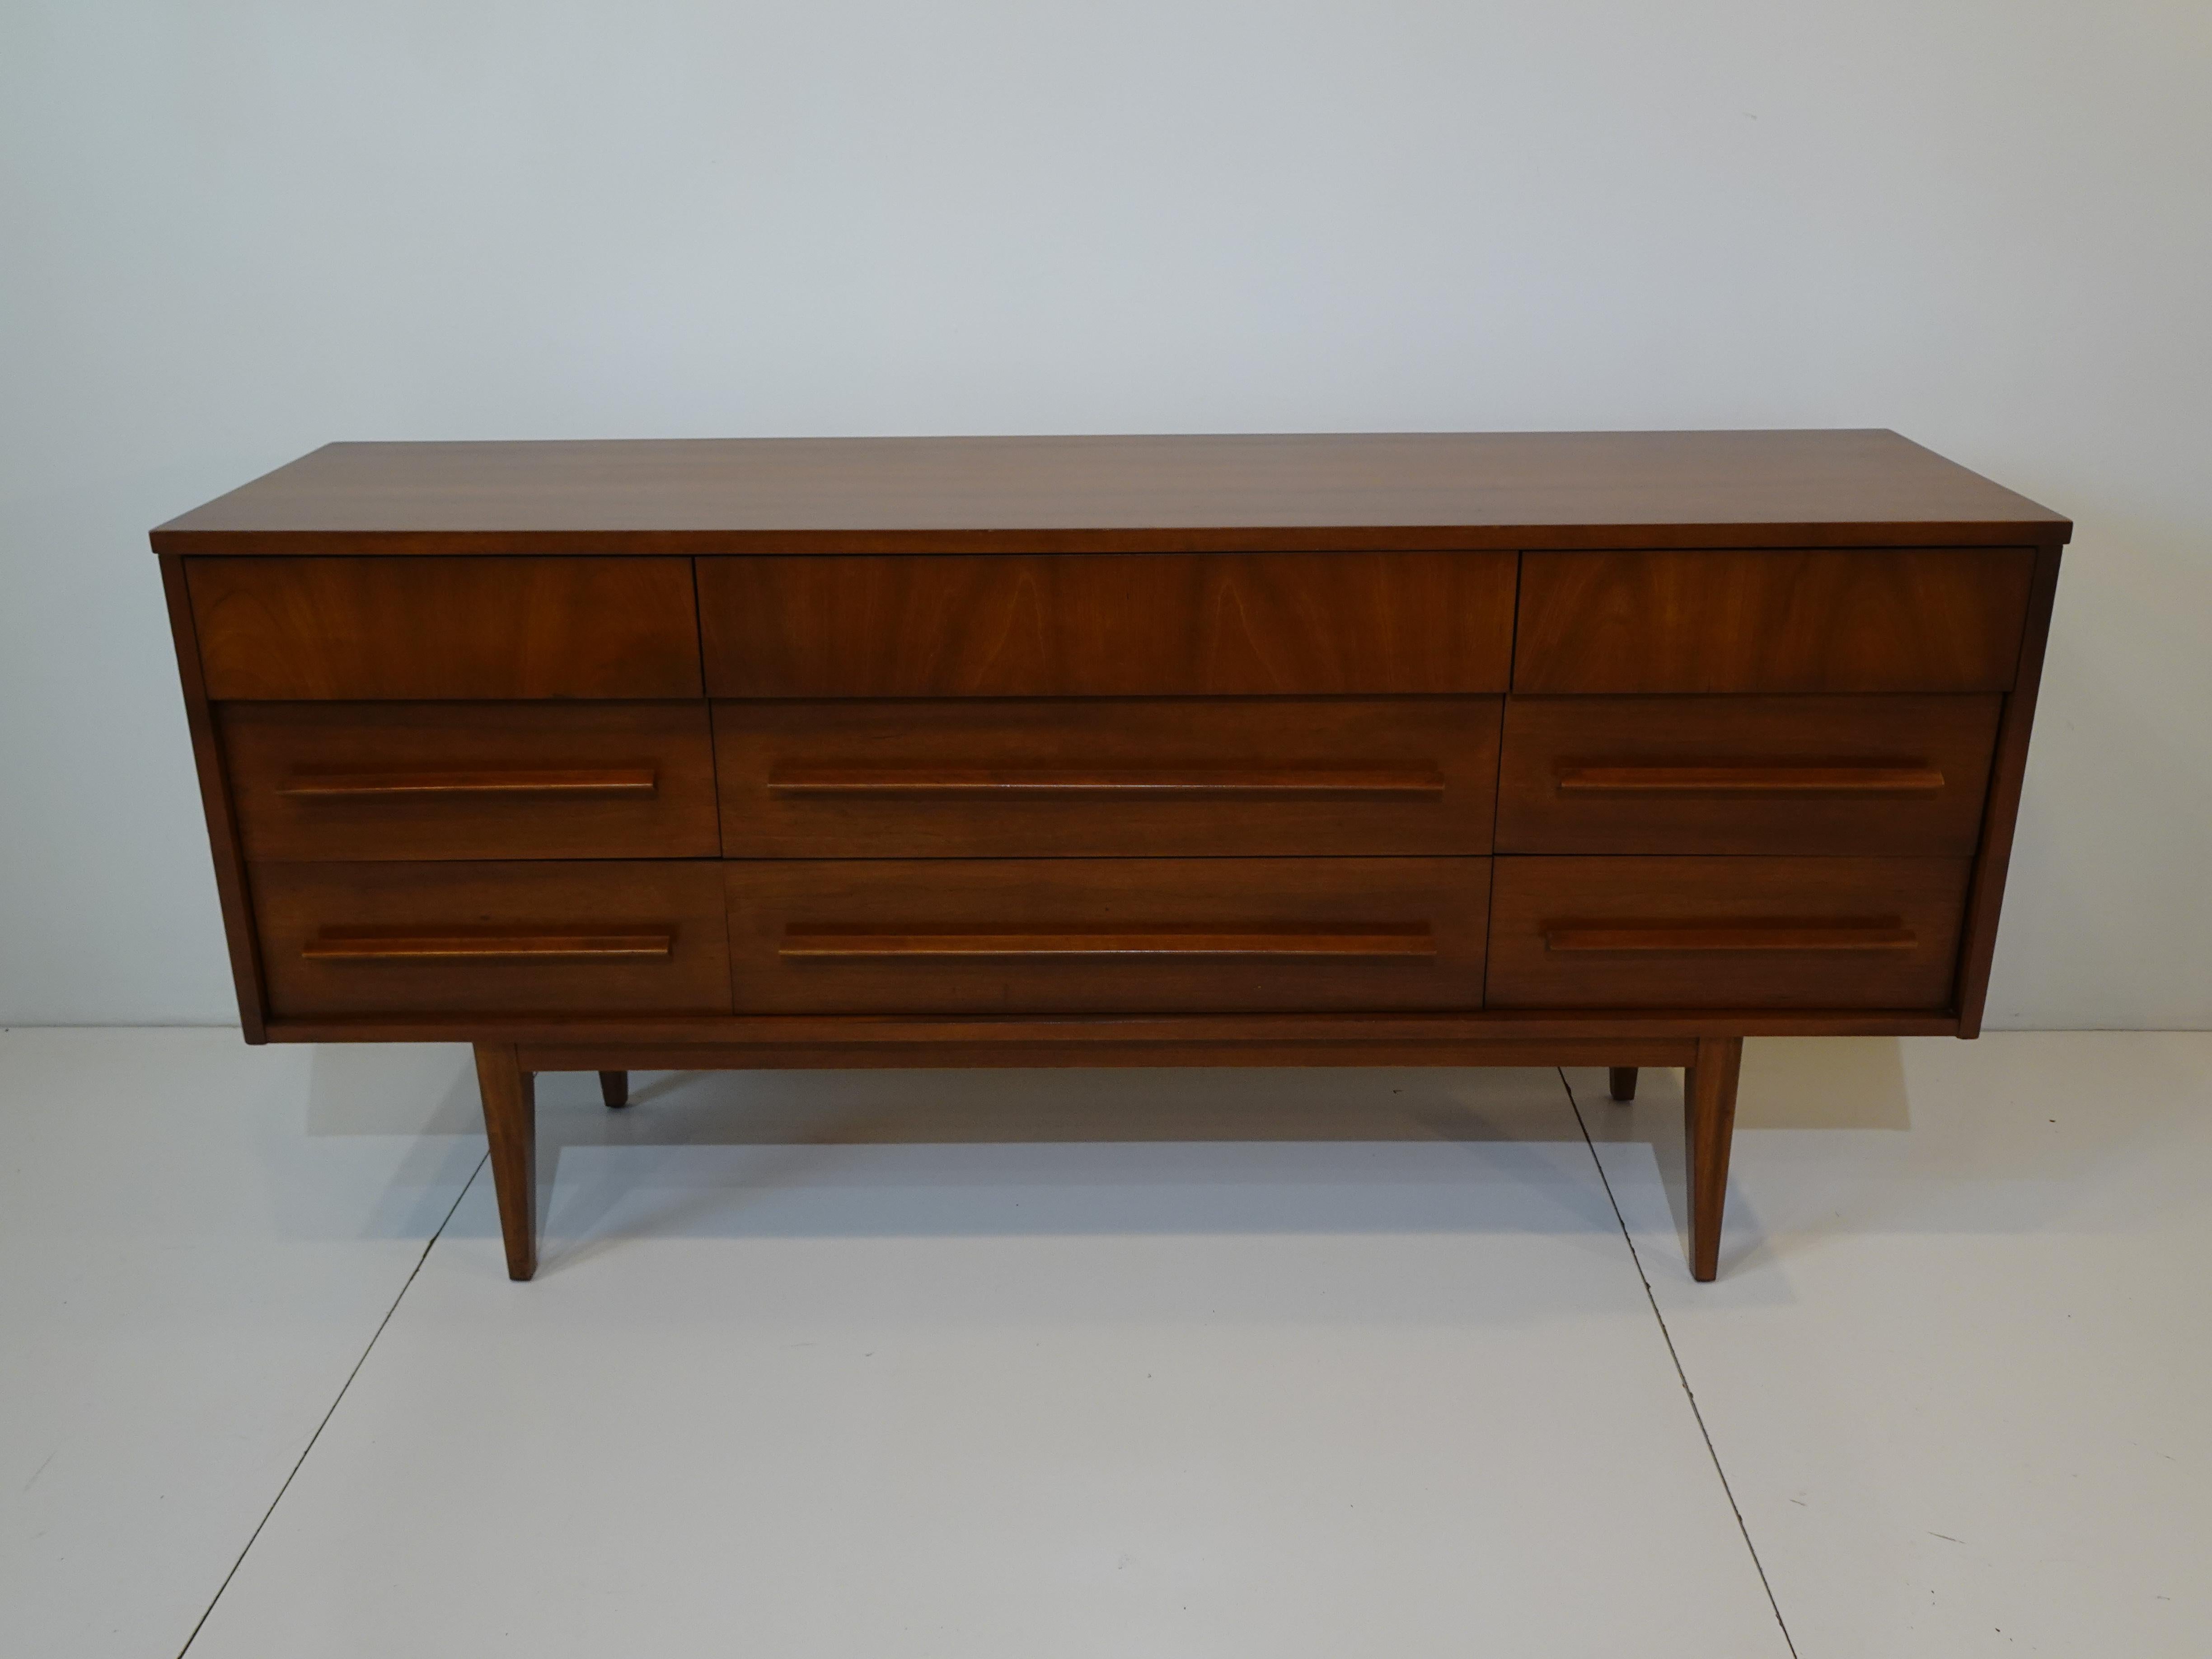 A dark walnut mid century dresser with long matching streamline pull handles with three upper slim styled drawers and six lower drawers . The piece has a low profile which is perfect giving the chest a nice clean design that can be used as a